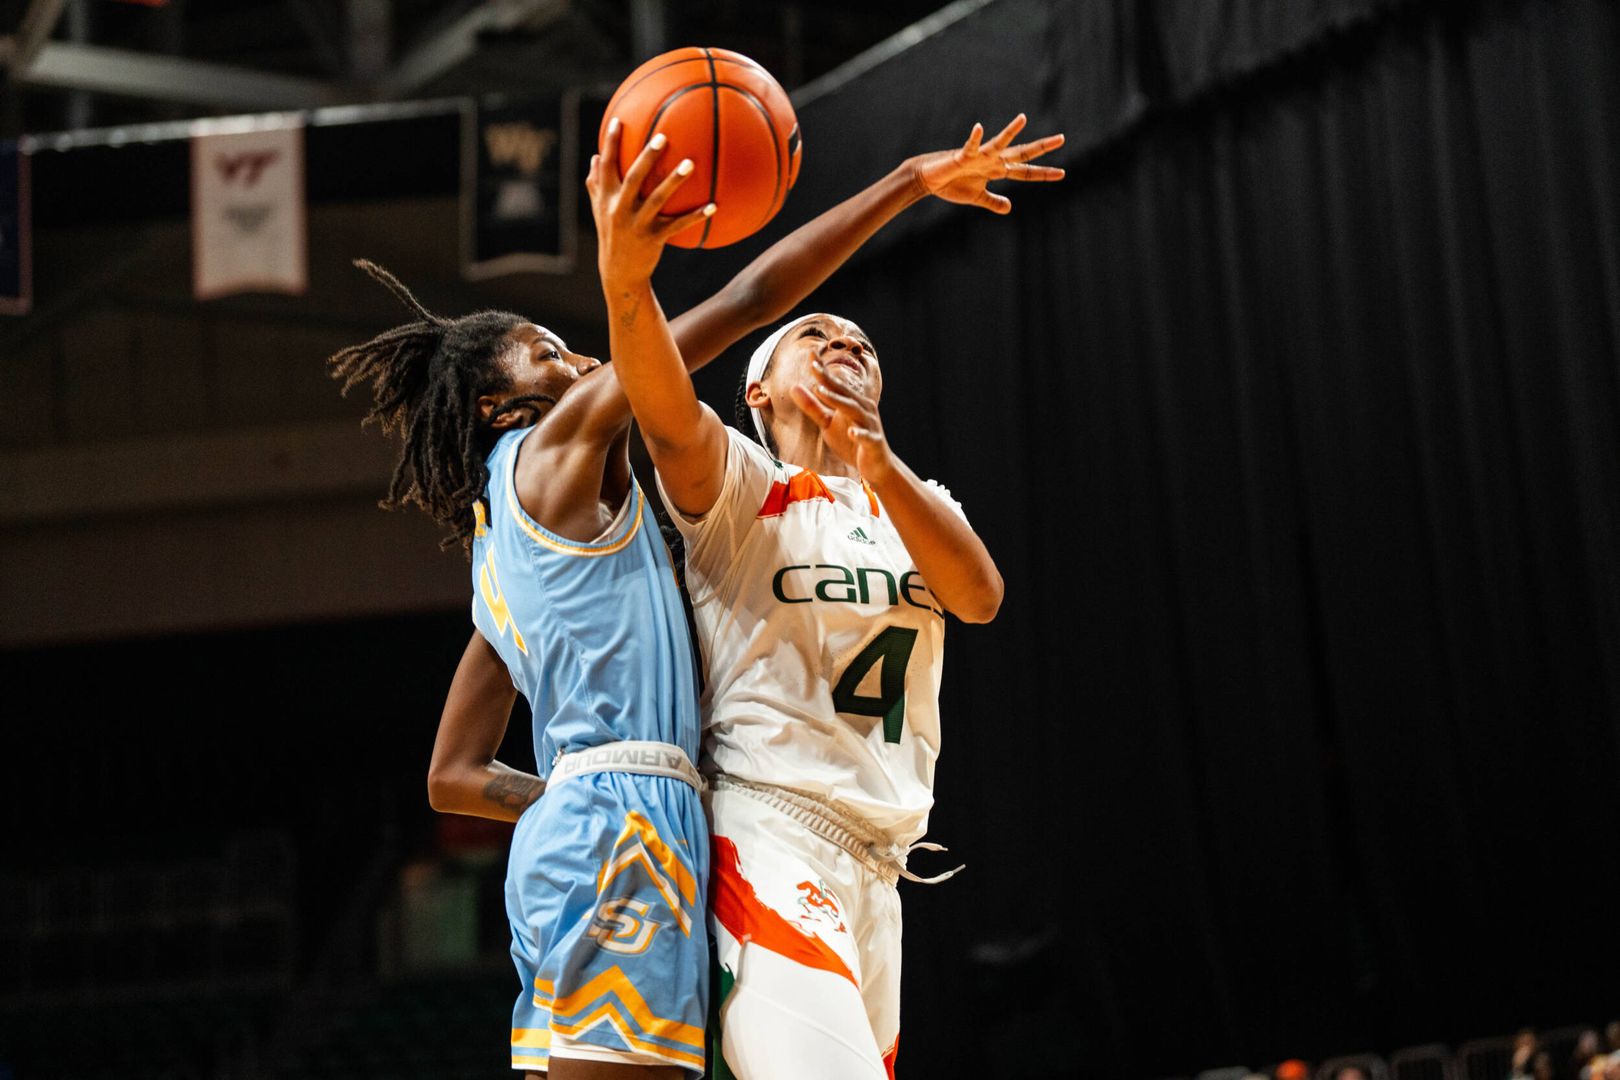 Roberts Leads Hurricanes Past Southern, 61-57